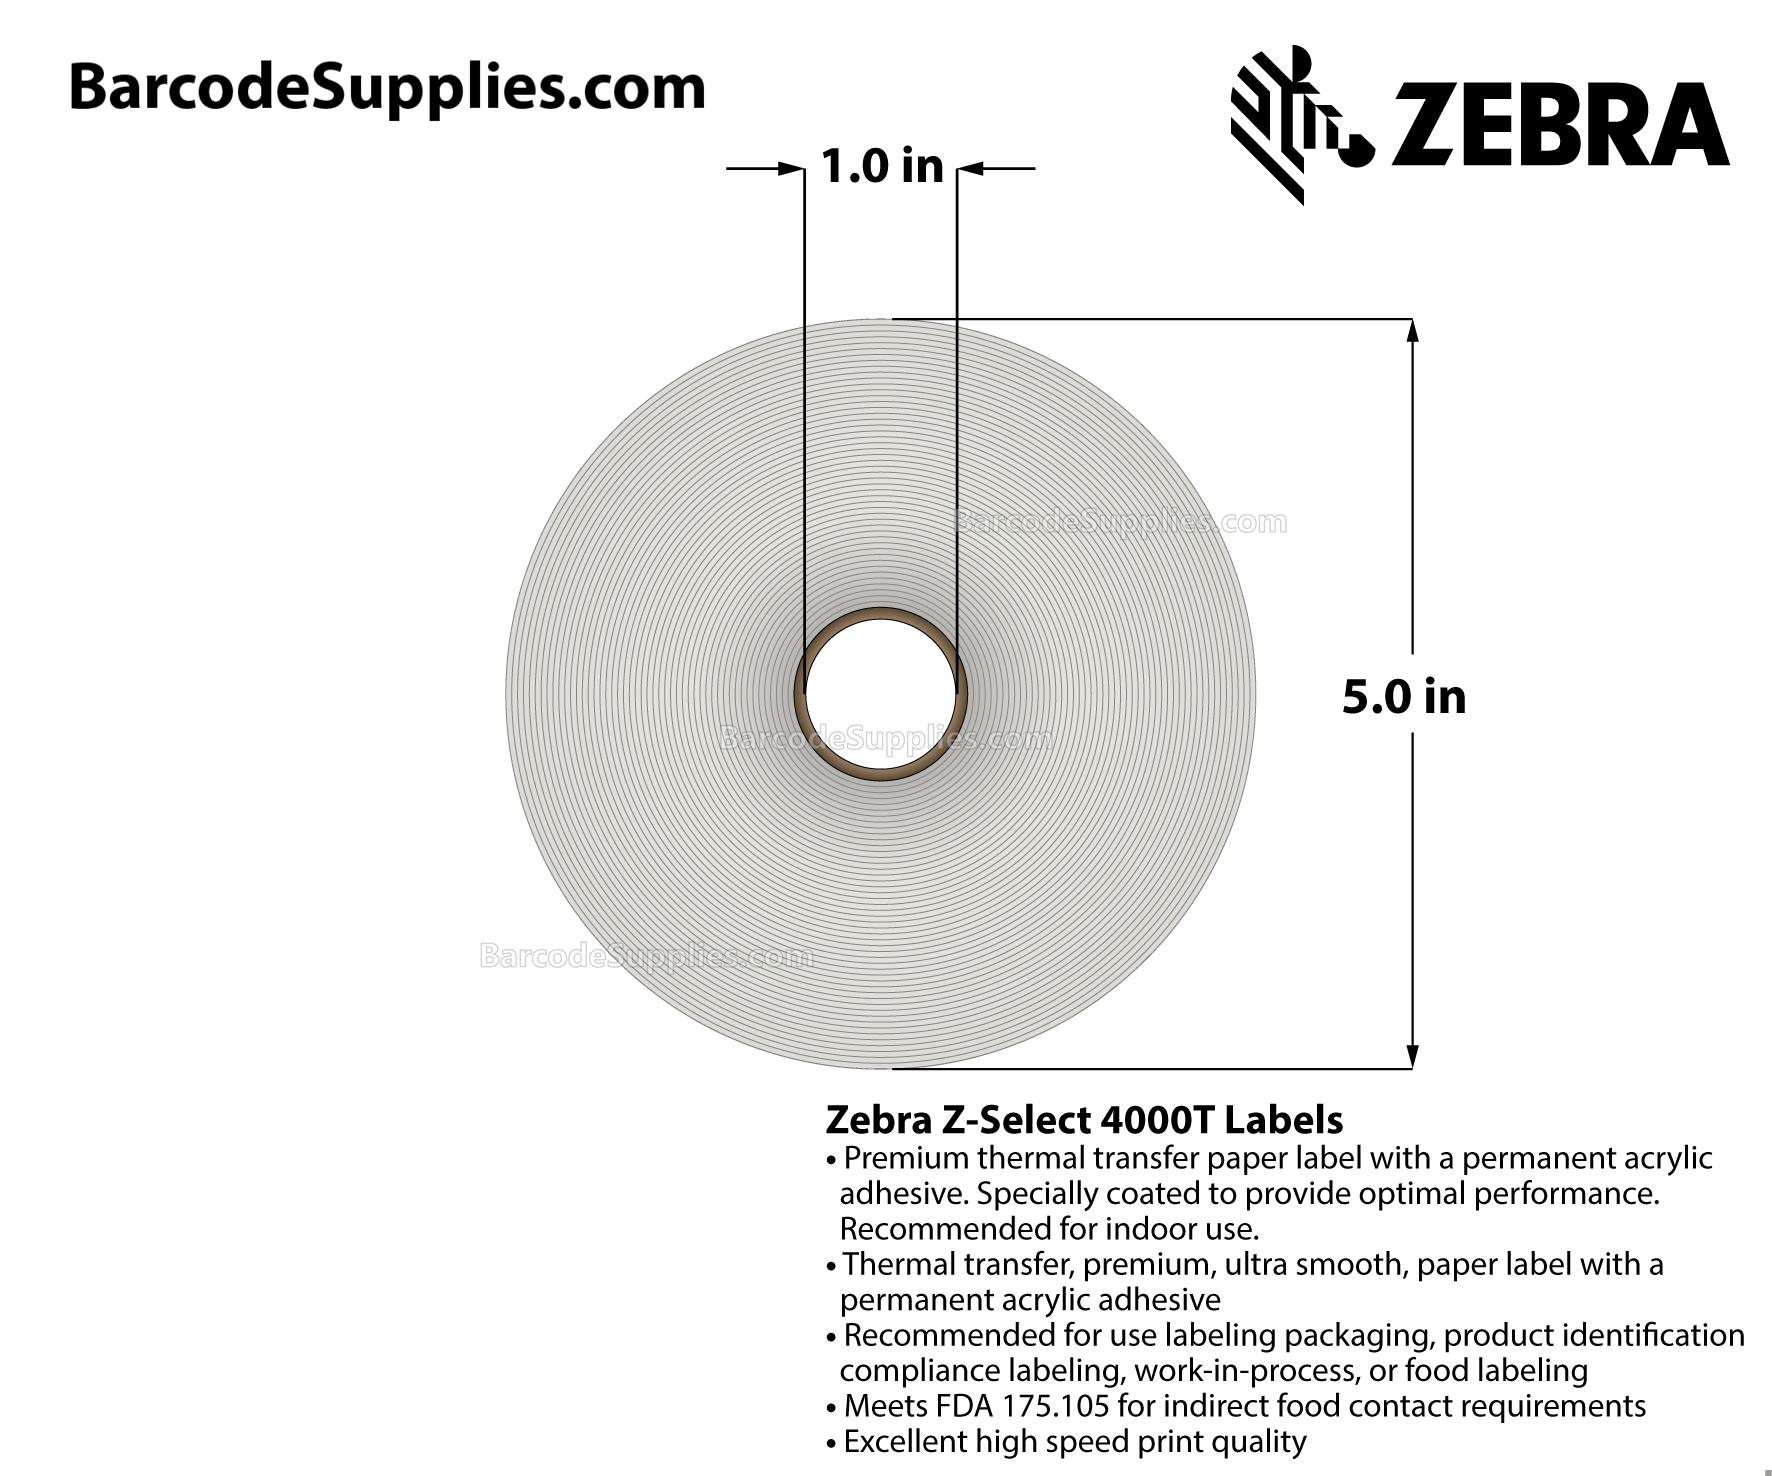 4 x 6.5 Thermal Transfer White Z-Select 4000T Labels With Permanent Adhesive - Perforated - 380 Labels Per Roll - Carton Of 4 Rolls - 1520 Labels Total - MPN: 83257